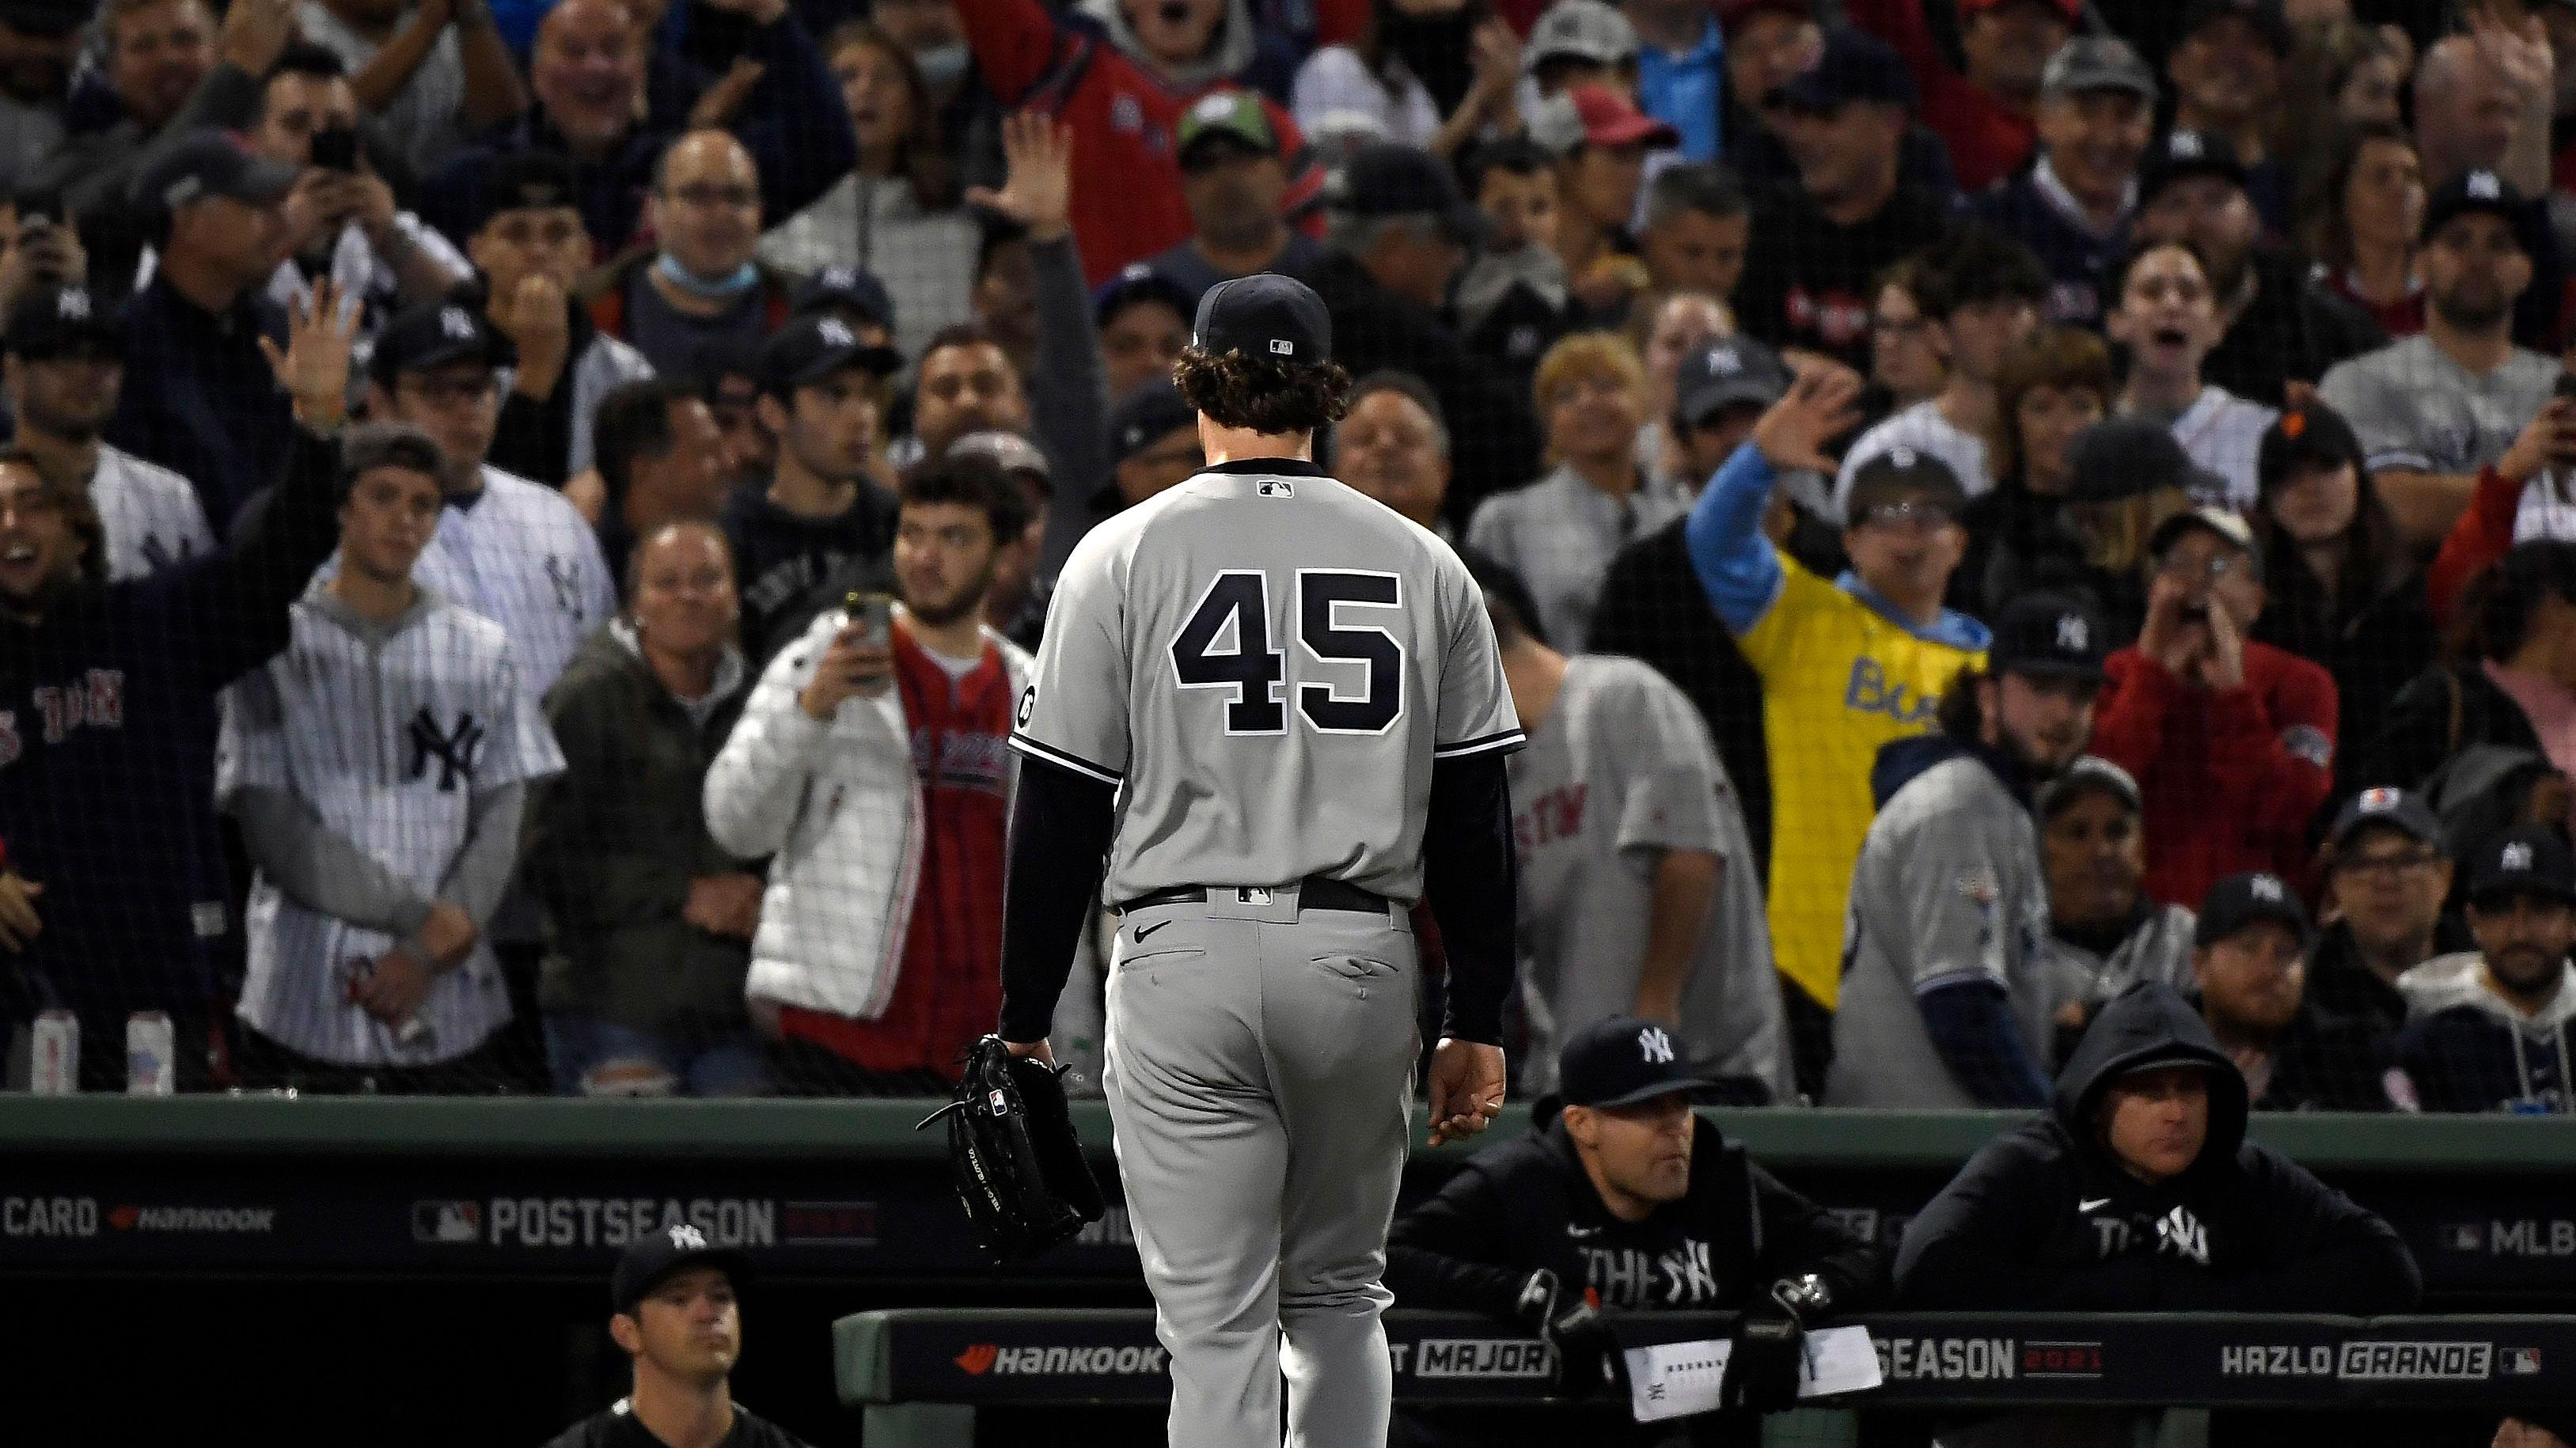 Oct 5, 2021; Boston, Massachusetts, USA; New York Yankees starting pitcher Gerrit Cole (45) walks to the dugout after being pulled against the Boston Red Sox during the third inning of the American League Wildcard game at Fenway Park. / Bob DeChiara-USA TODAY Sports